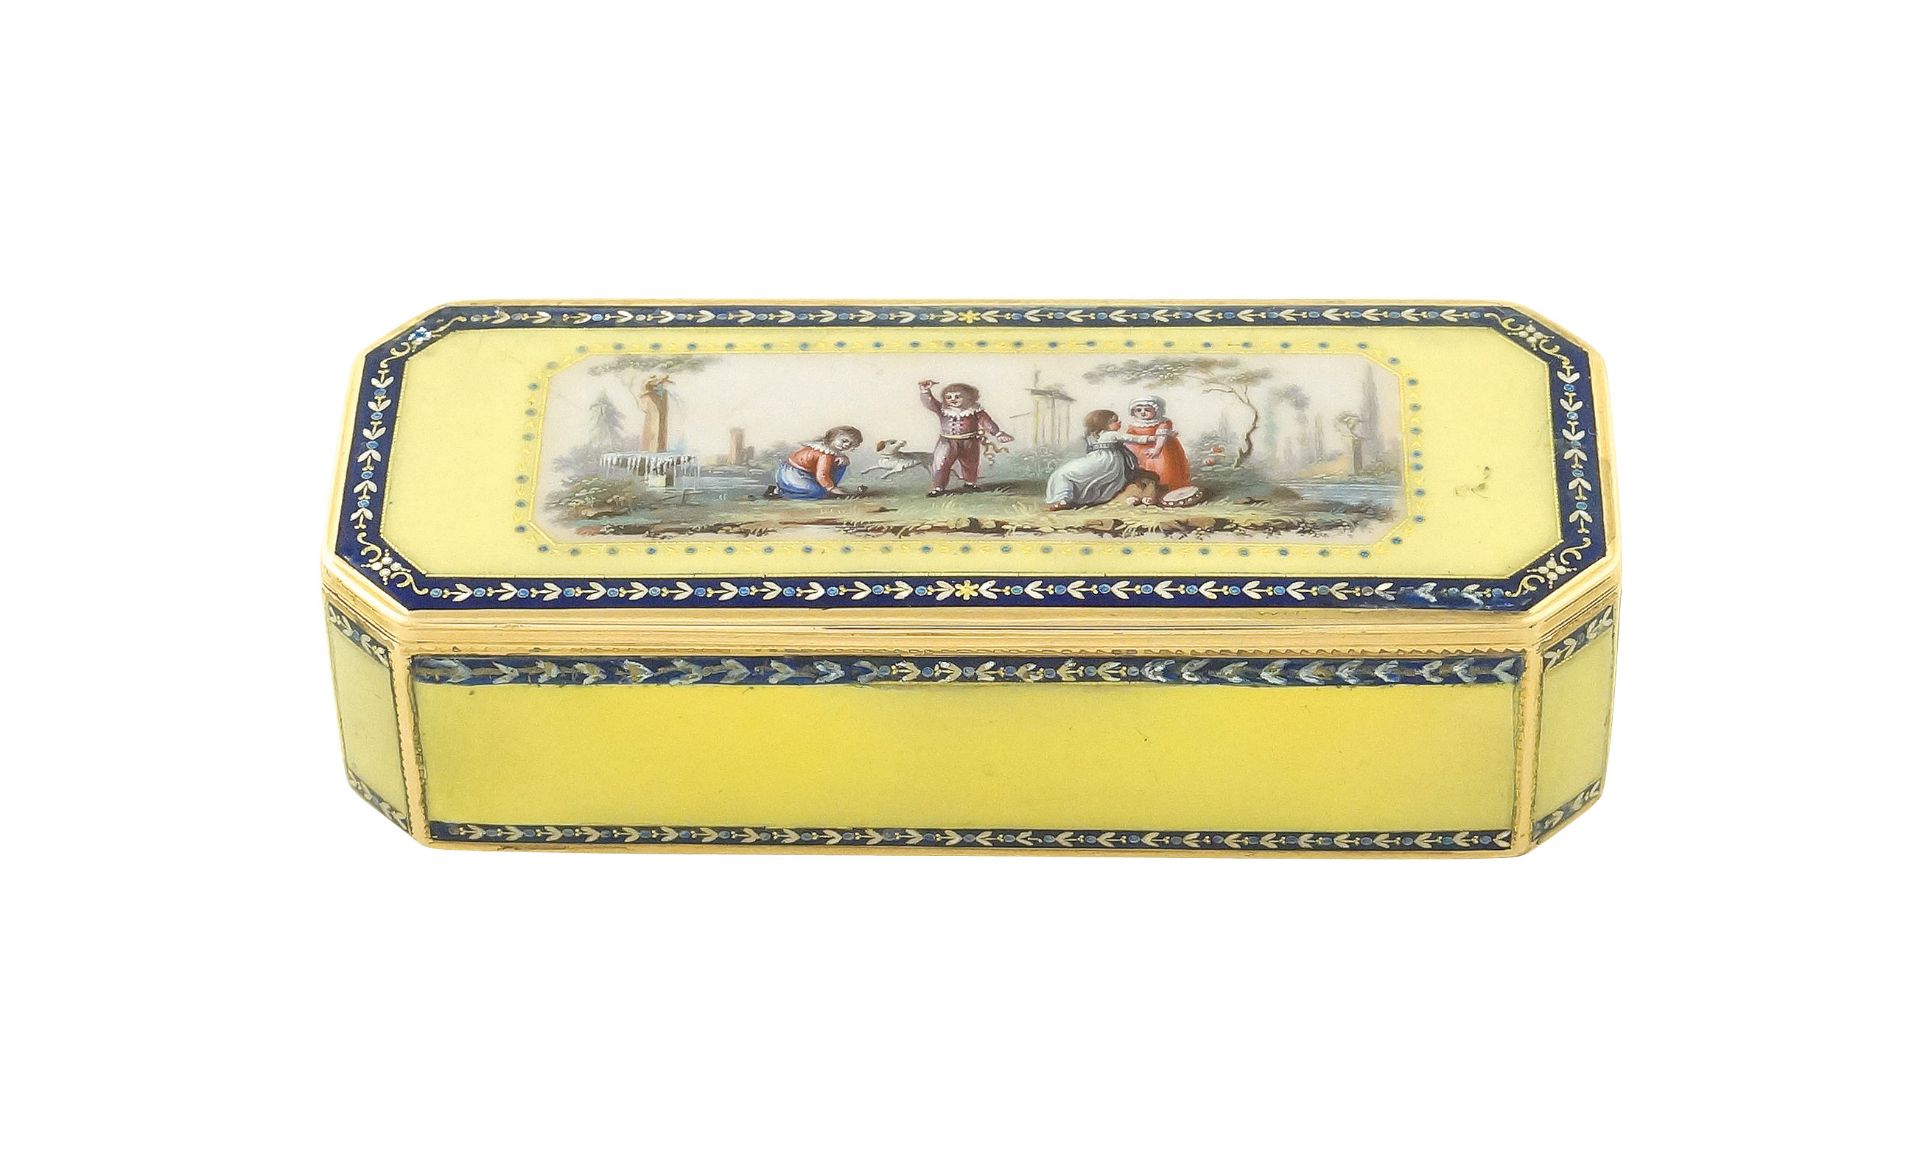 A French rose gold and enamel snuff box